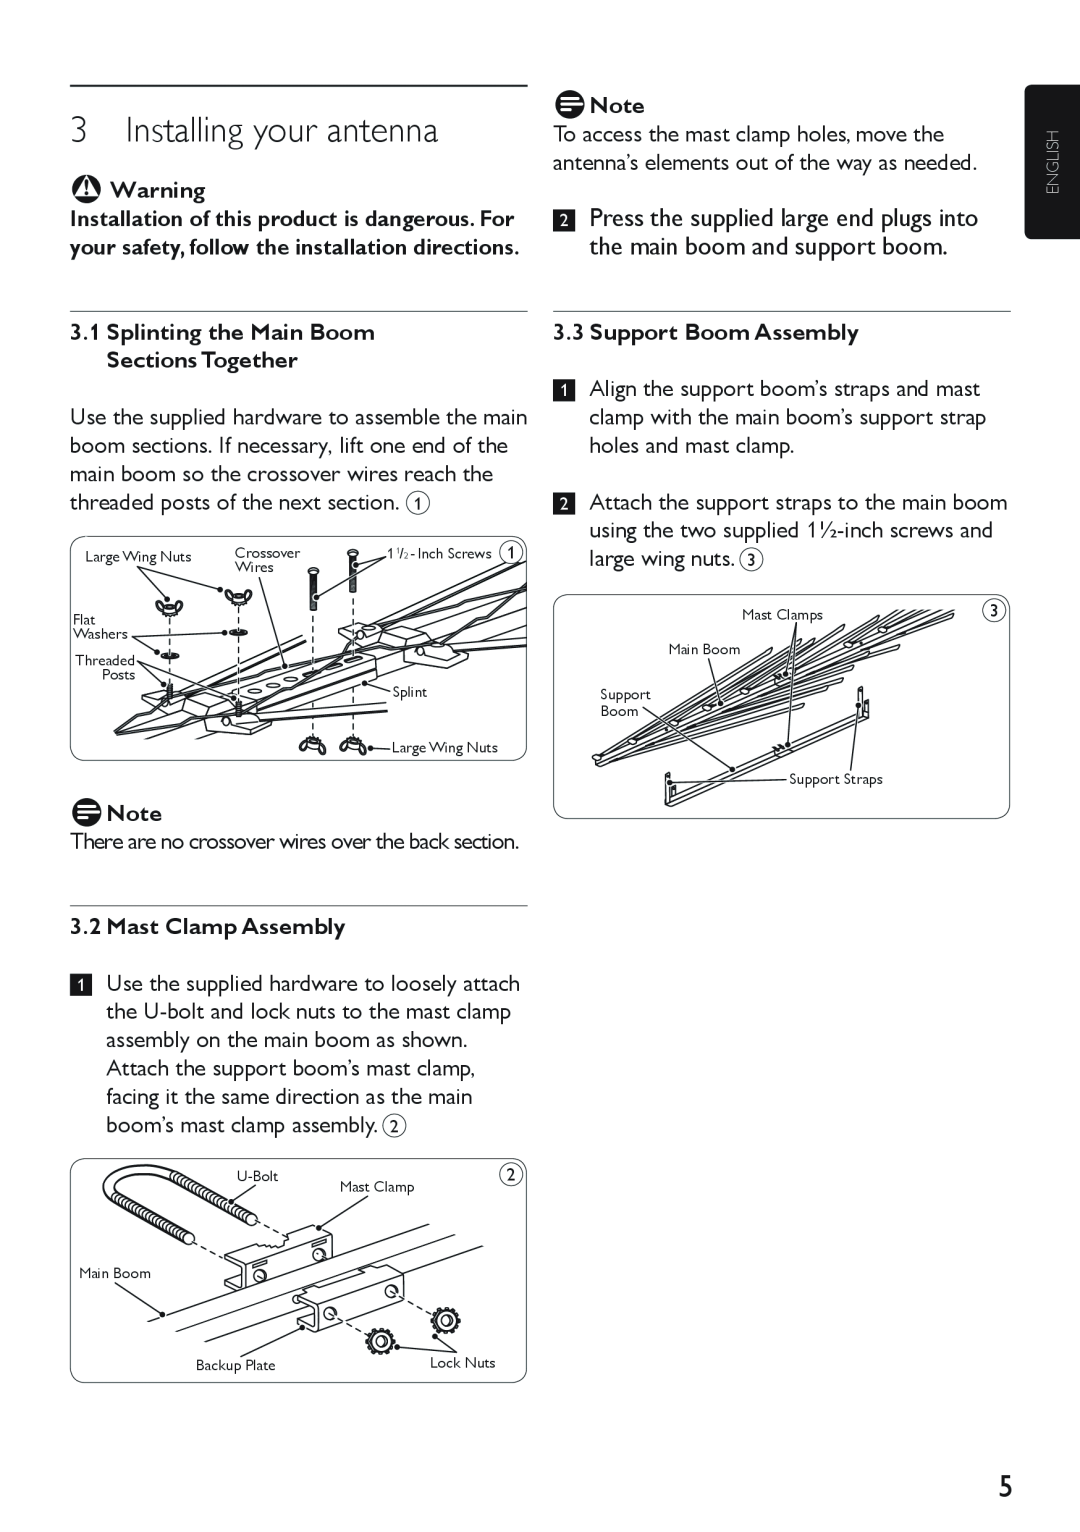 Philips SDV4401/27 manual Installing your antenna, BWarning, 3.1Splinting the Main Boom Sections Together, DNote 